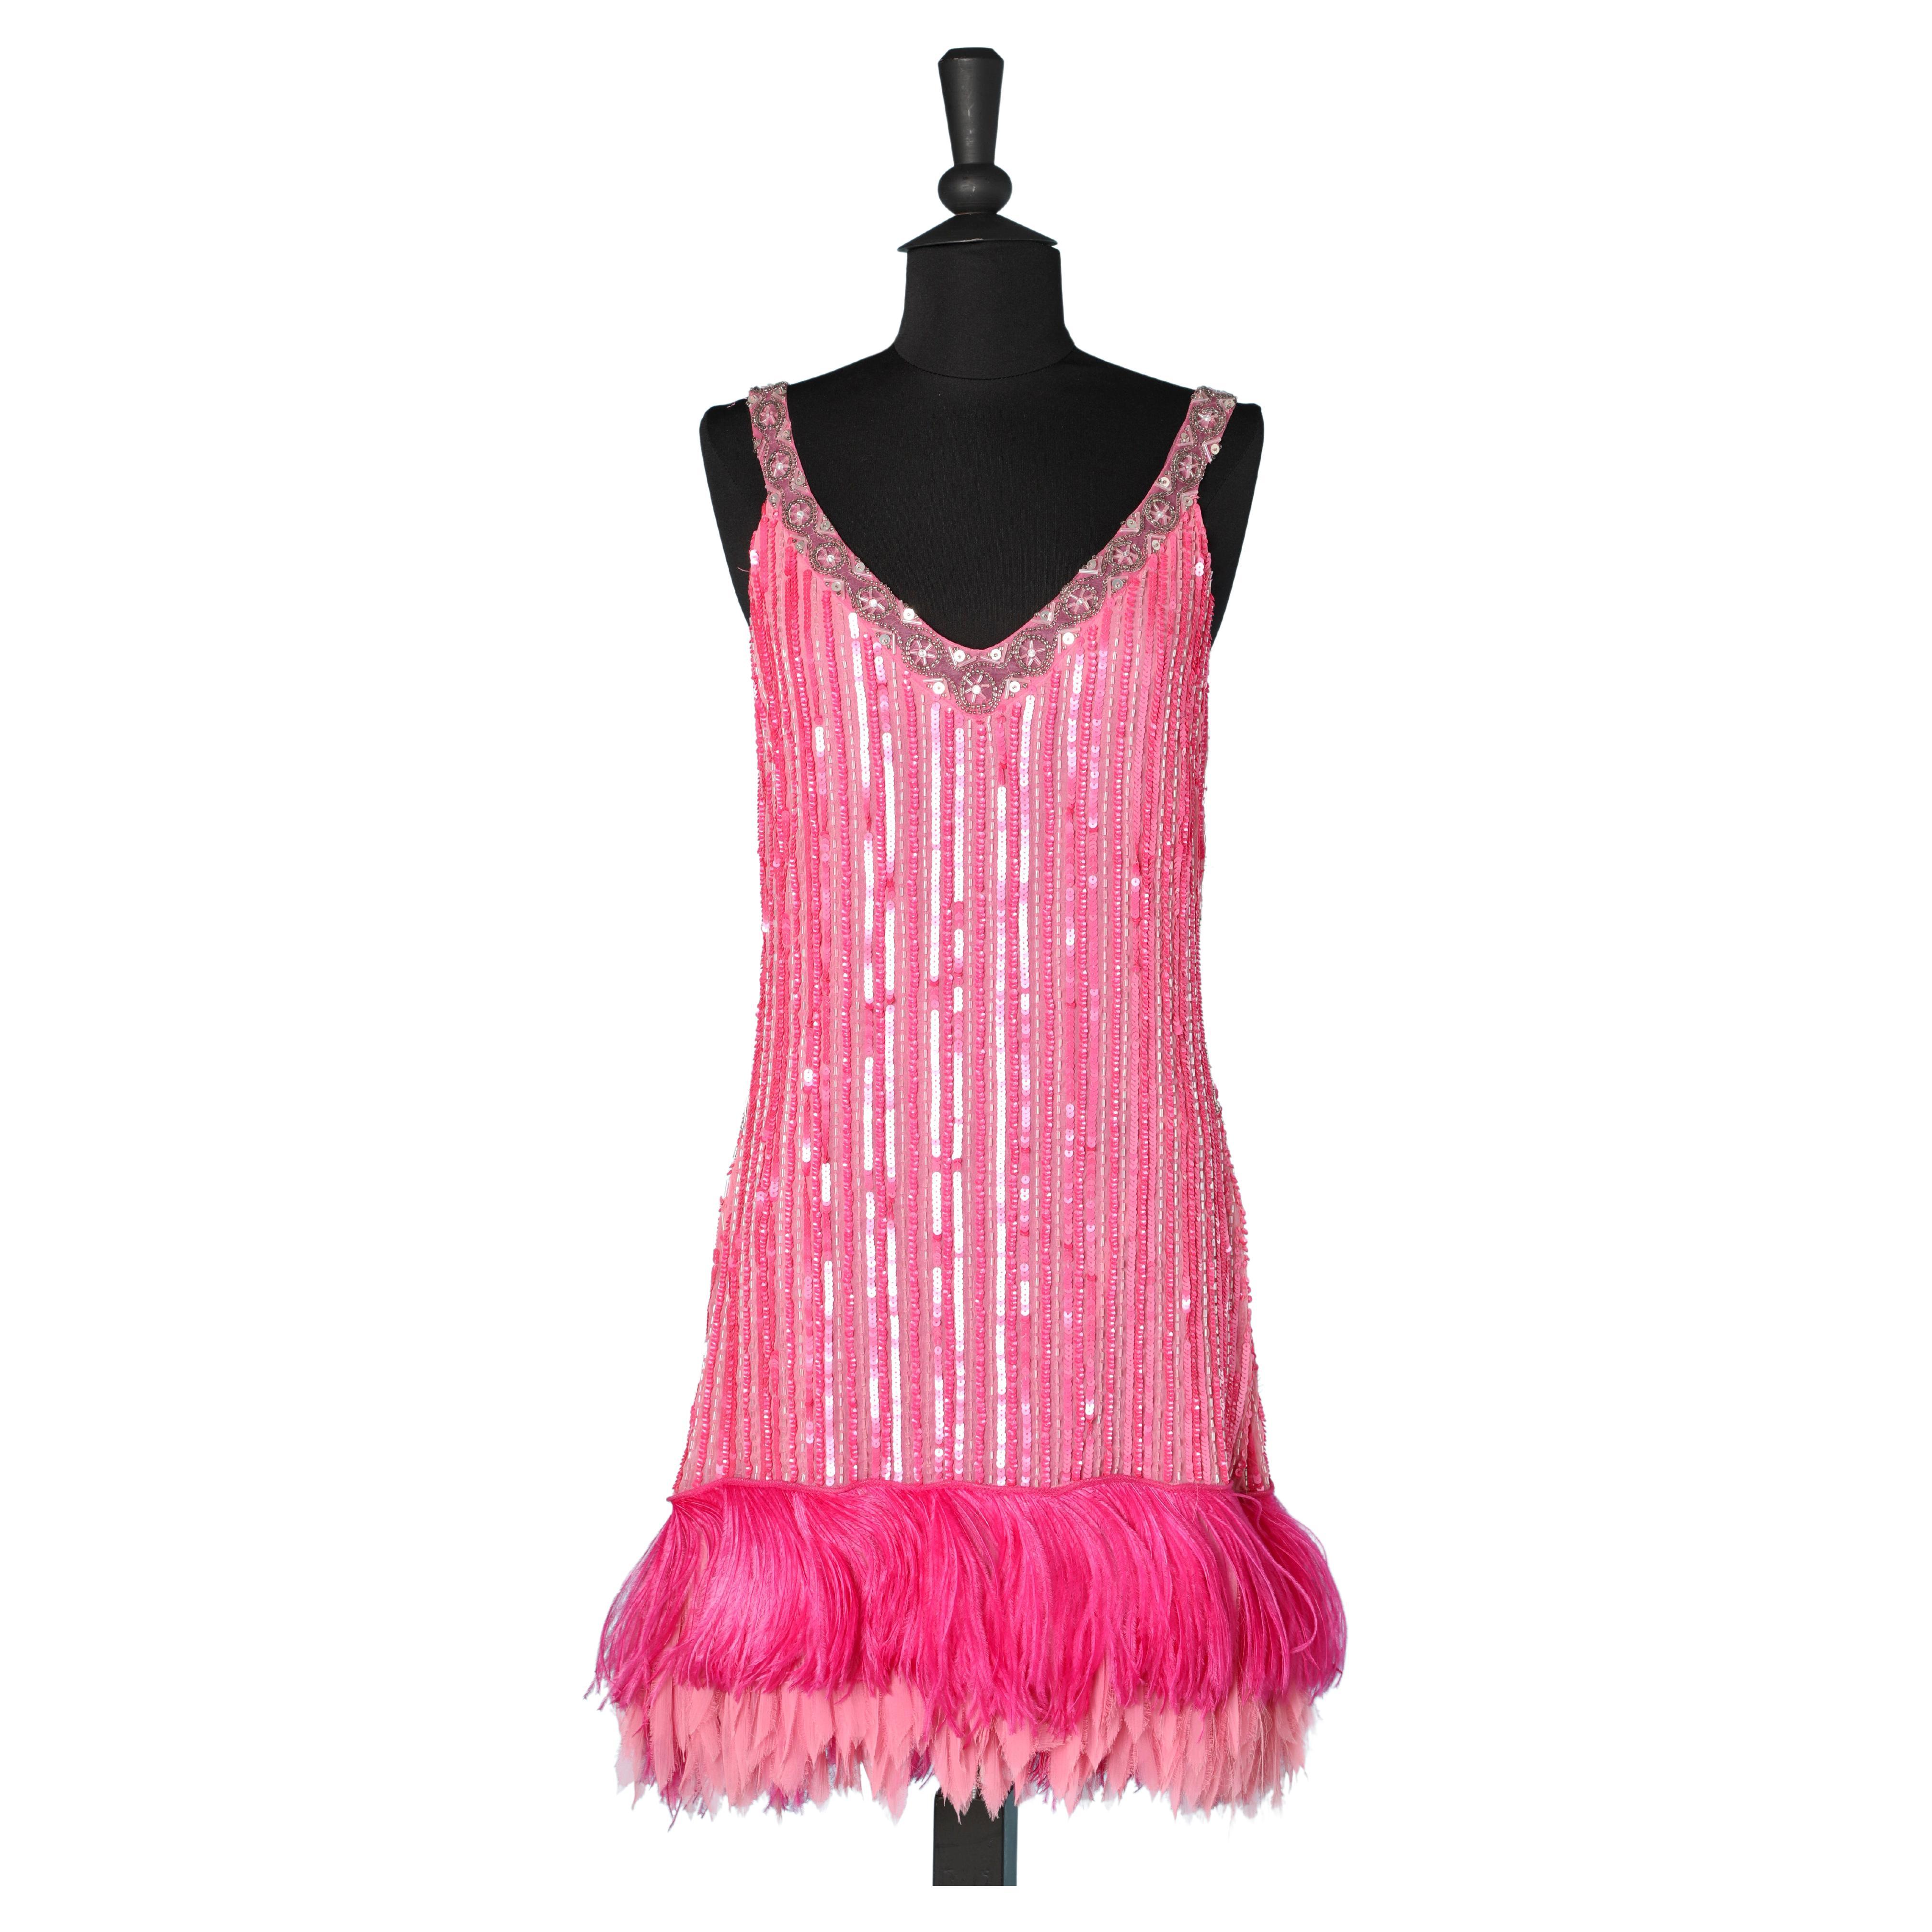 Pink chiffon dress fully embroidered with feathers  Blugirl Blumarine